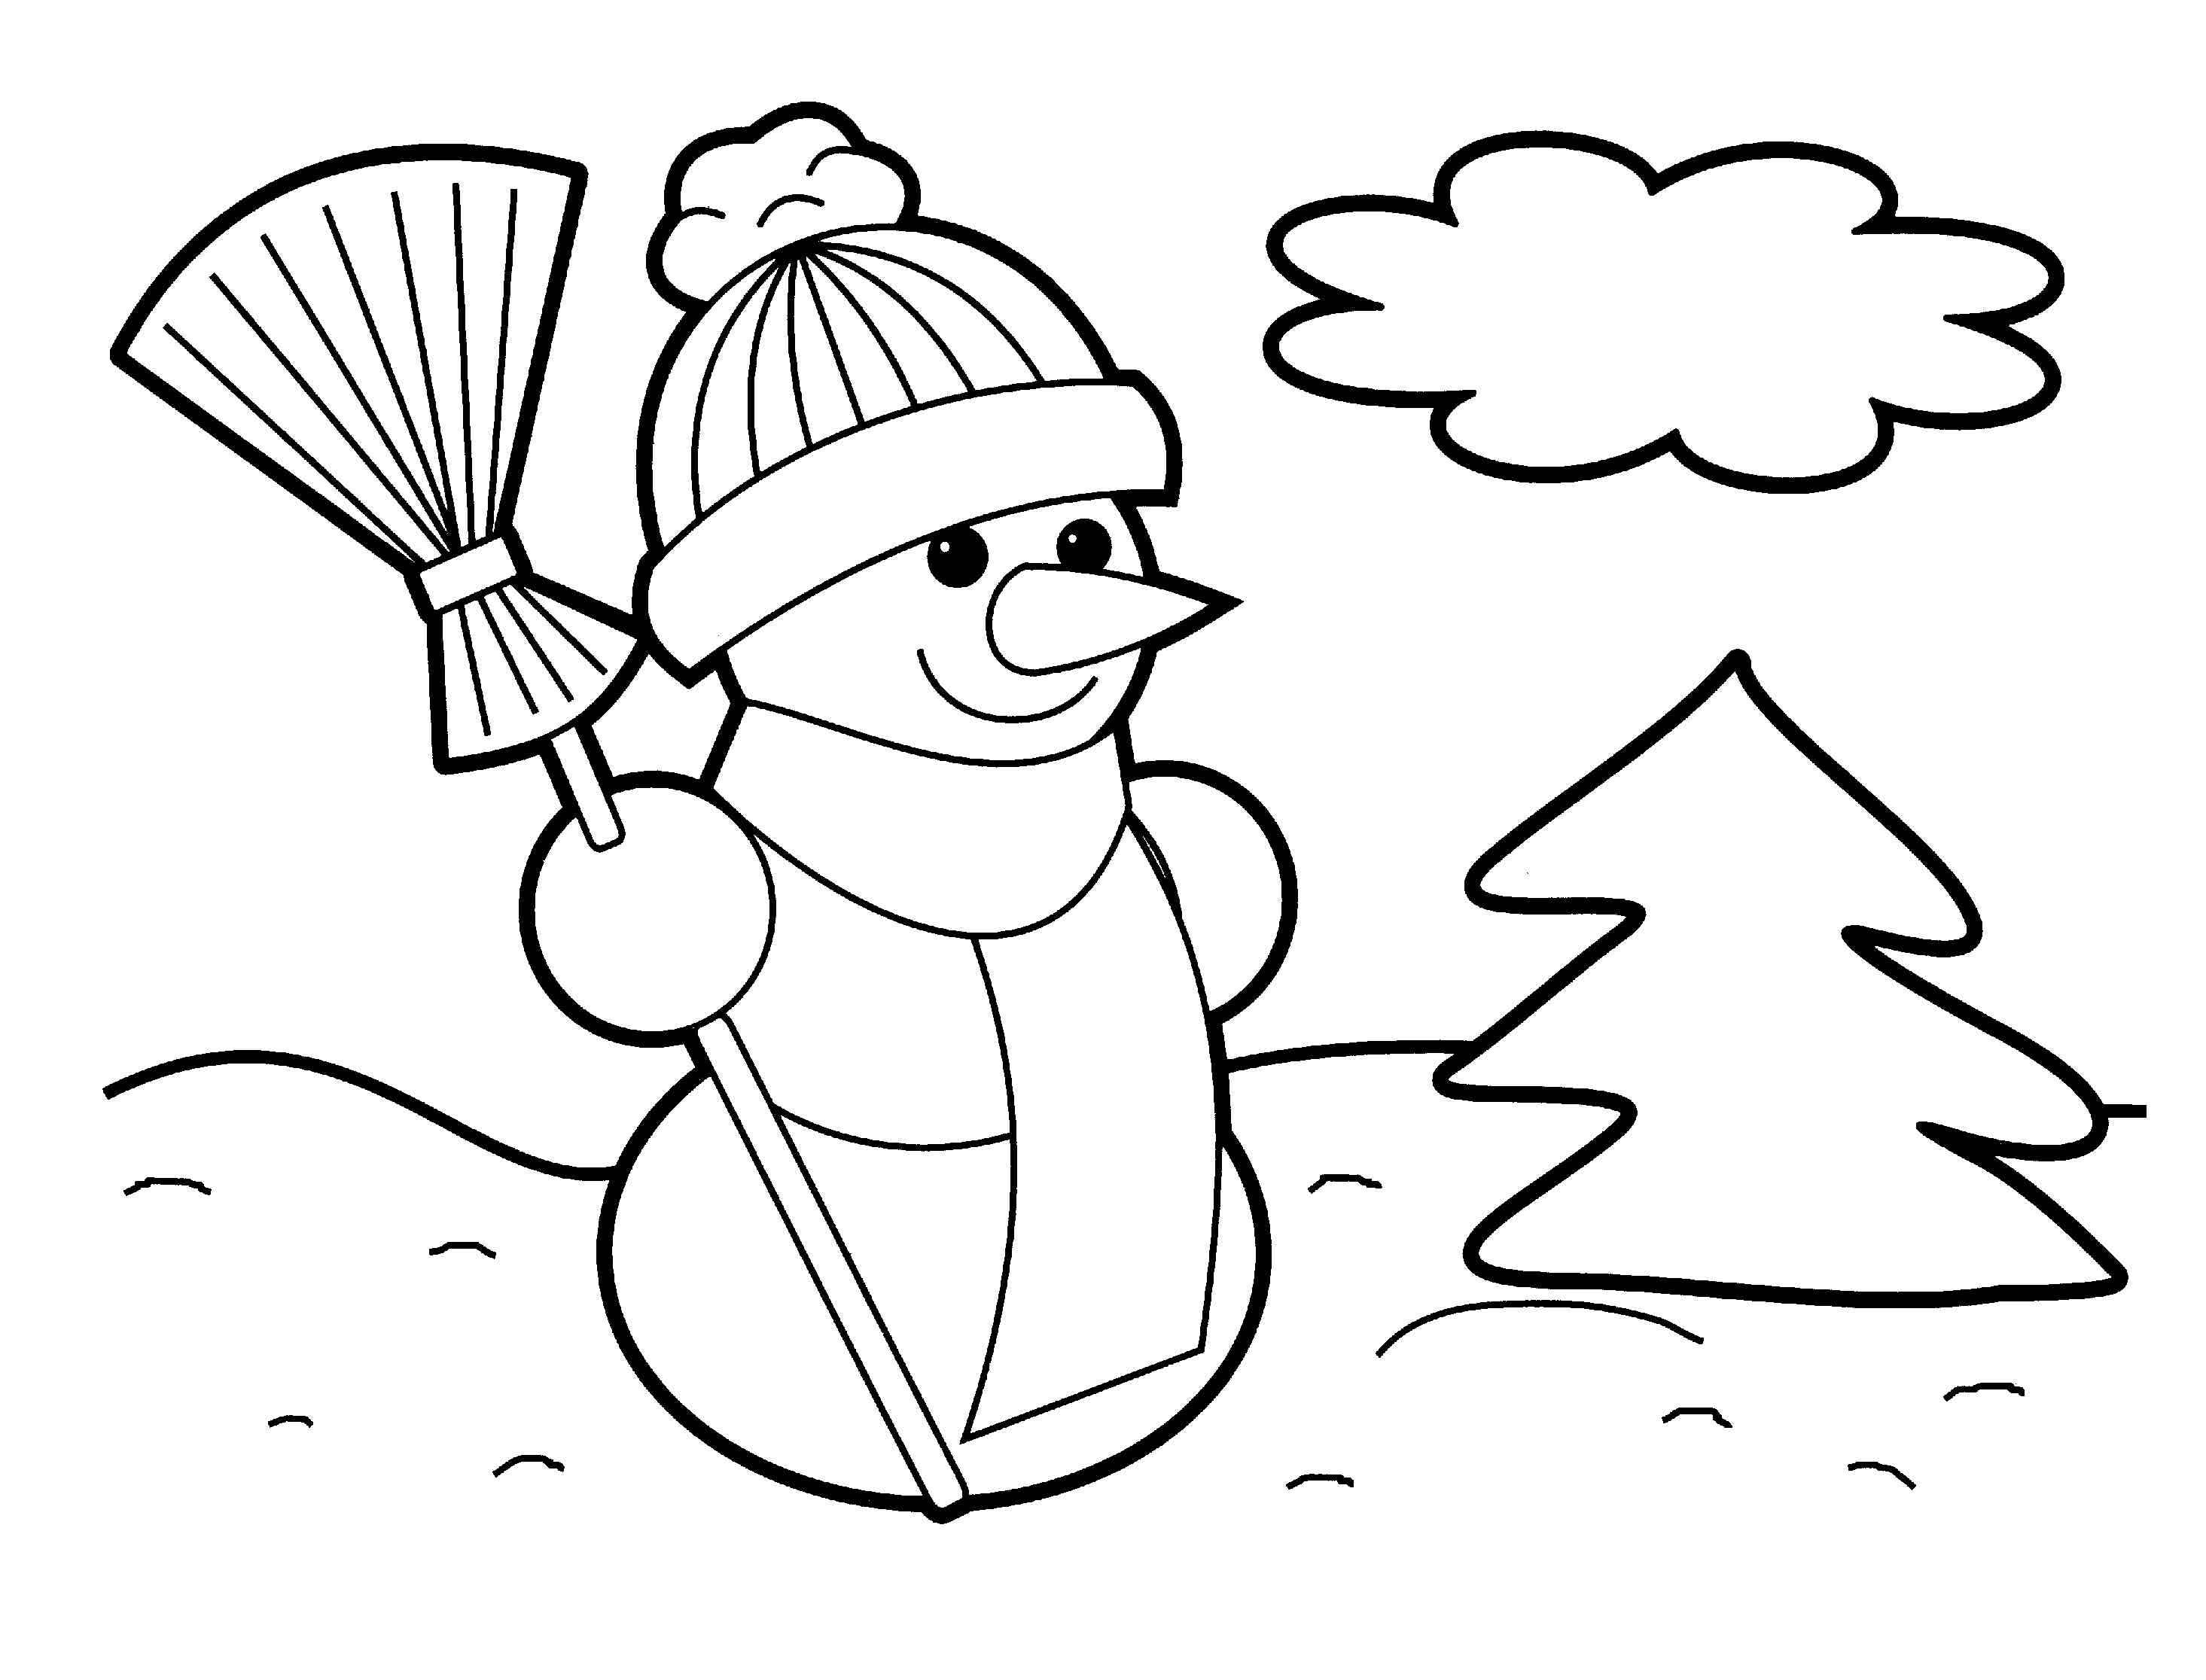 Elsa Christmas Coloring Pages at GetColorings.com | Free printable